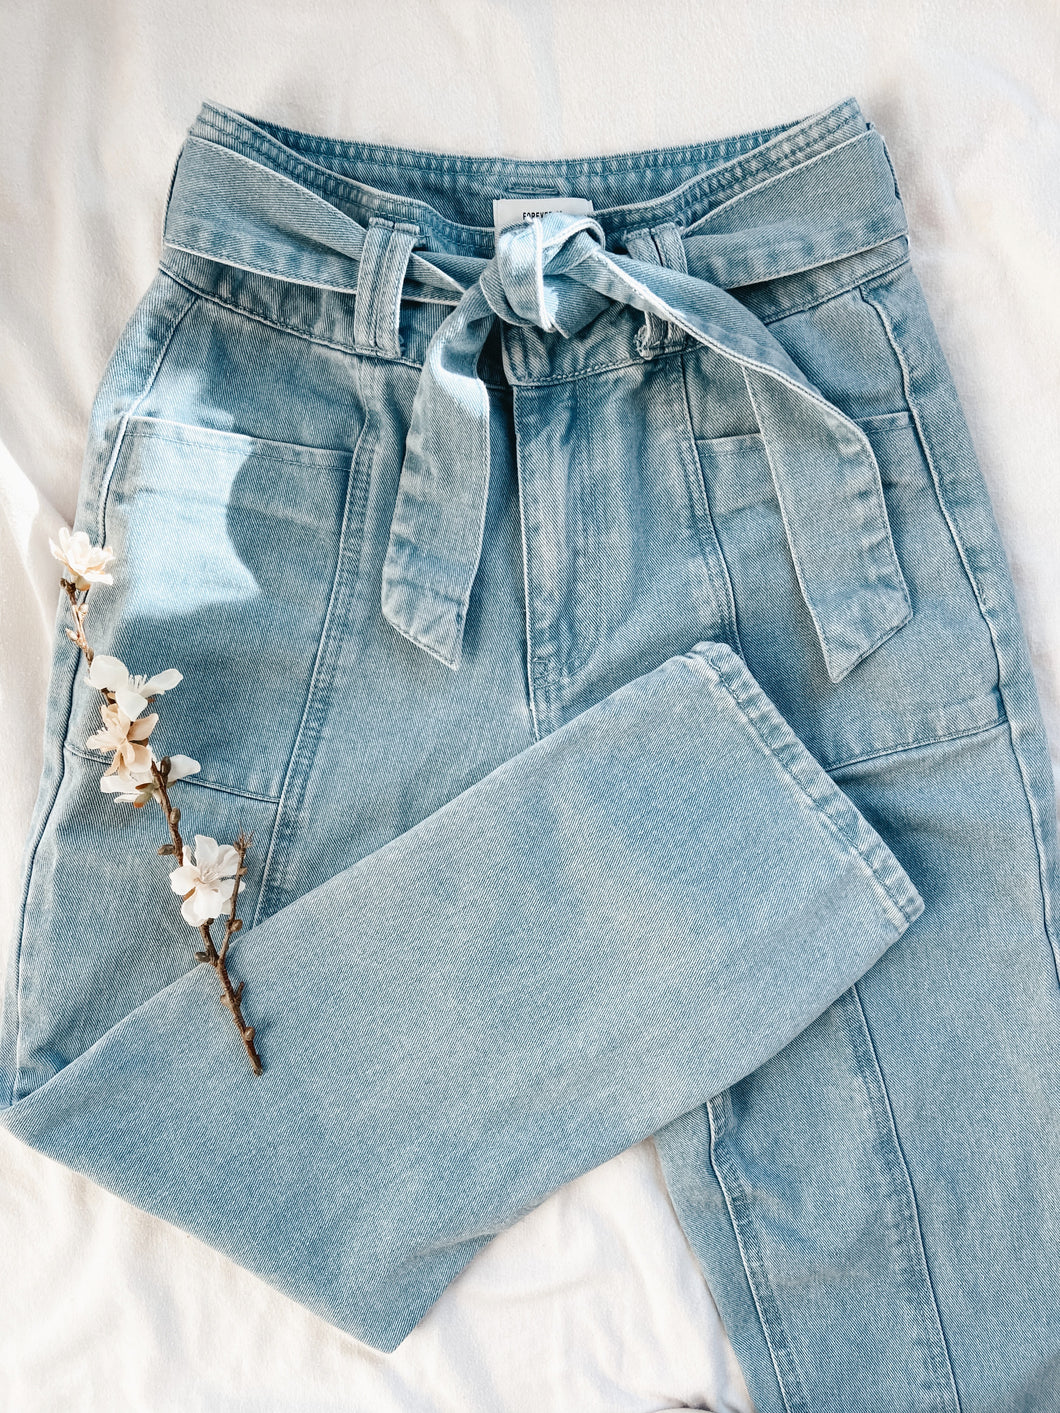 F21 High-Rise Tie Jeans